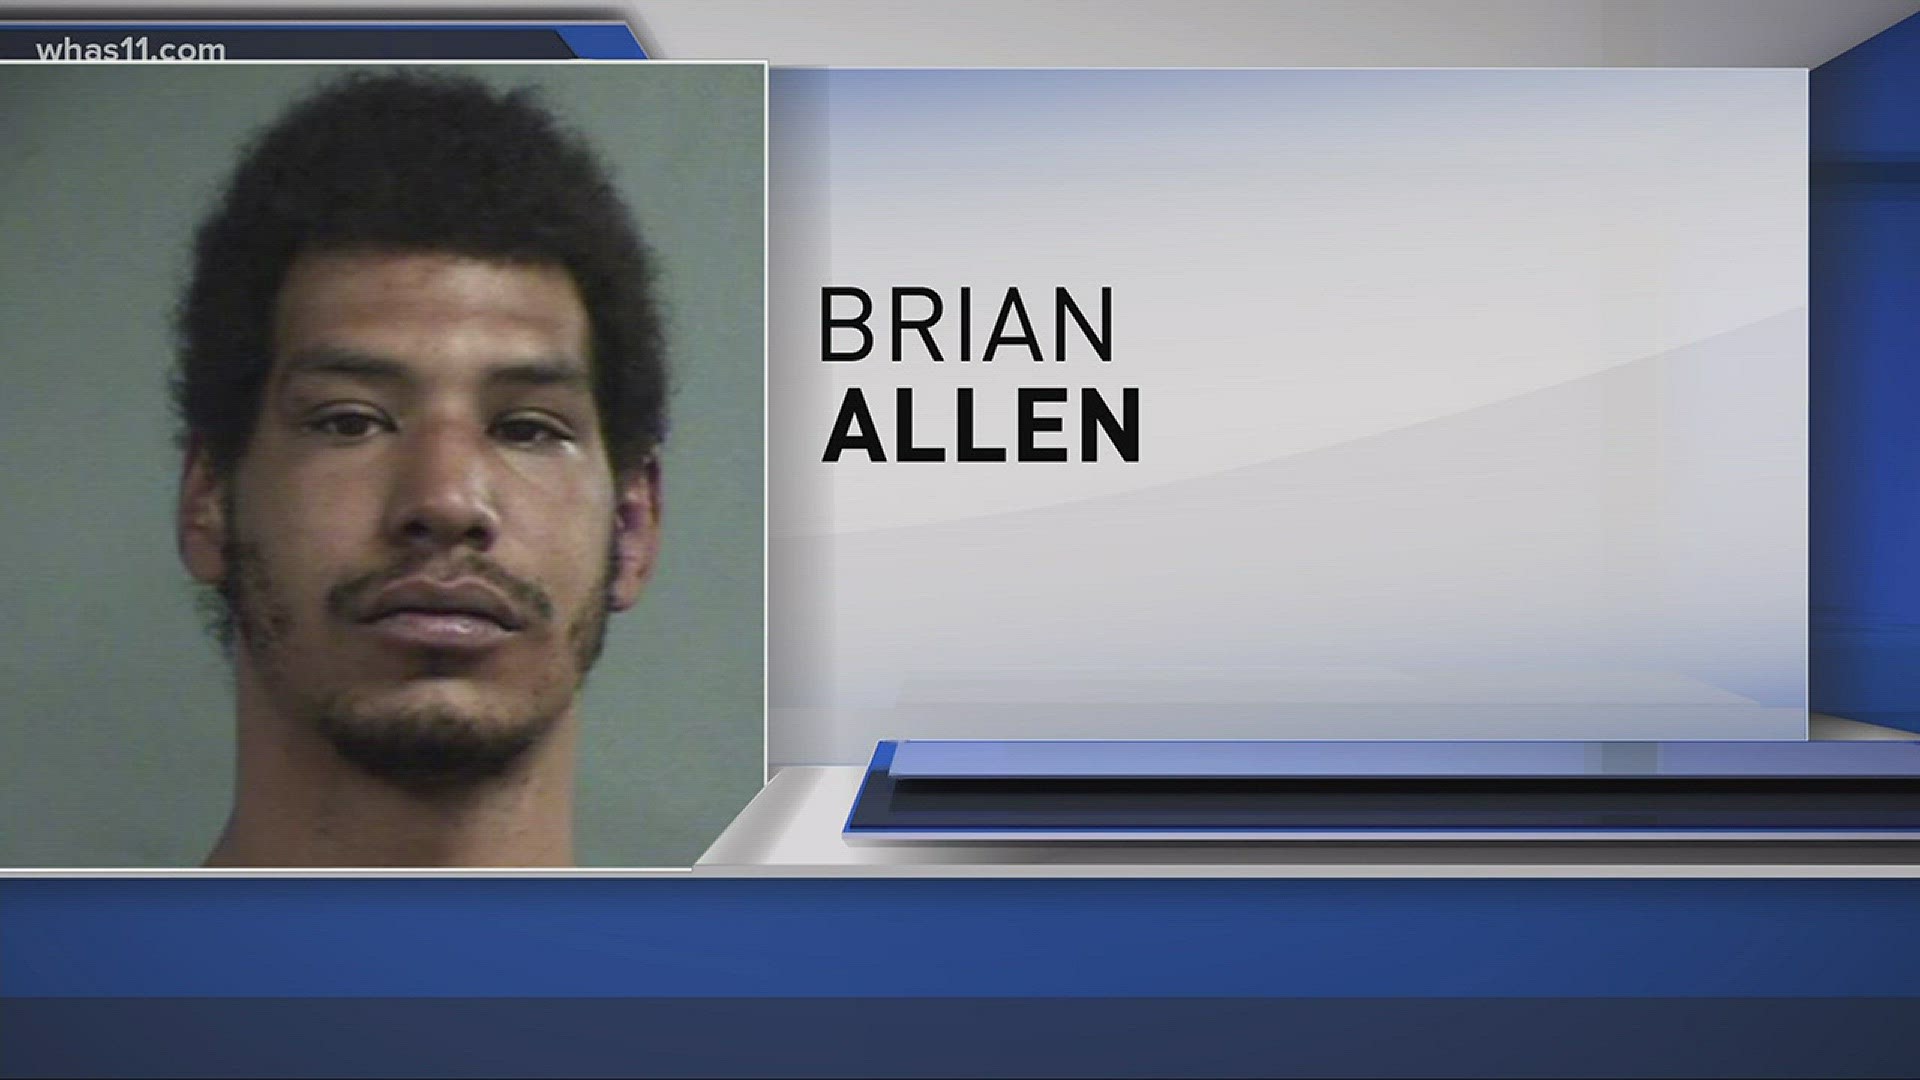 Man charged after assaulting EMT's, police say